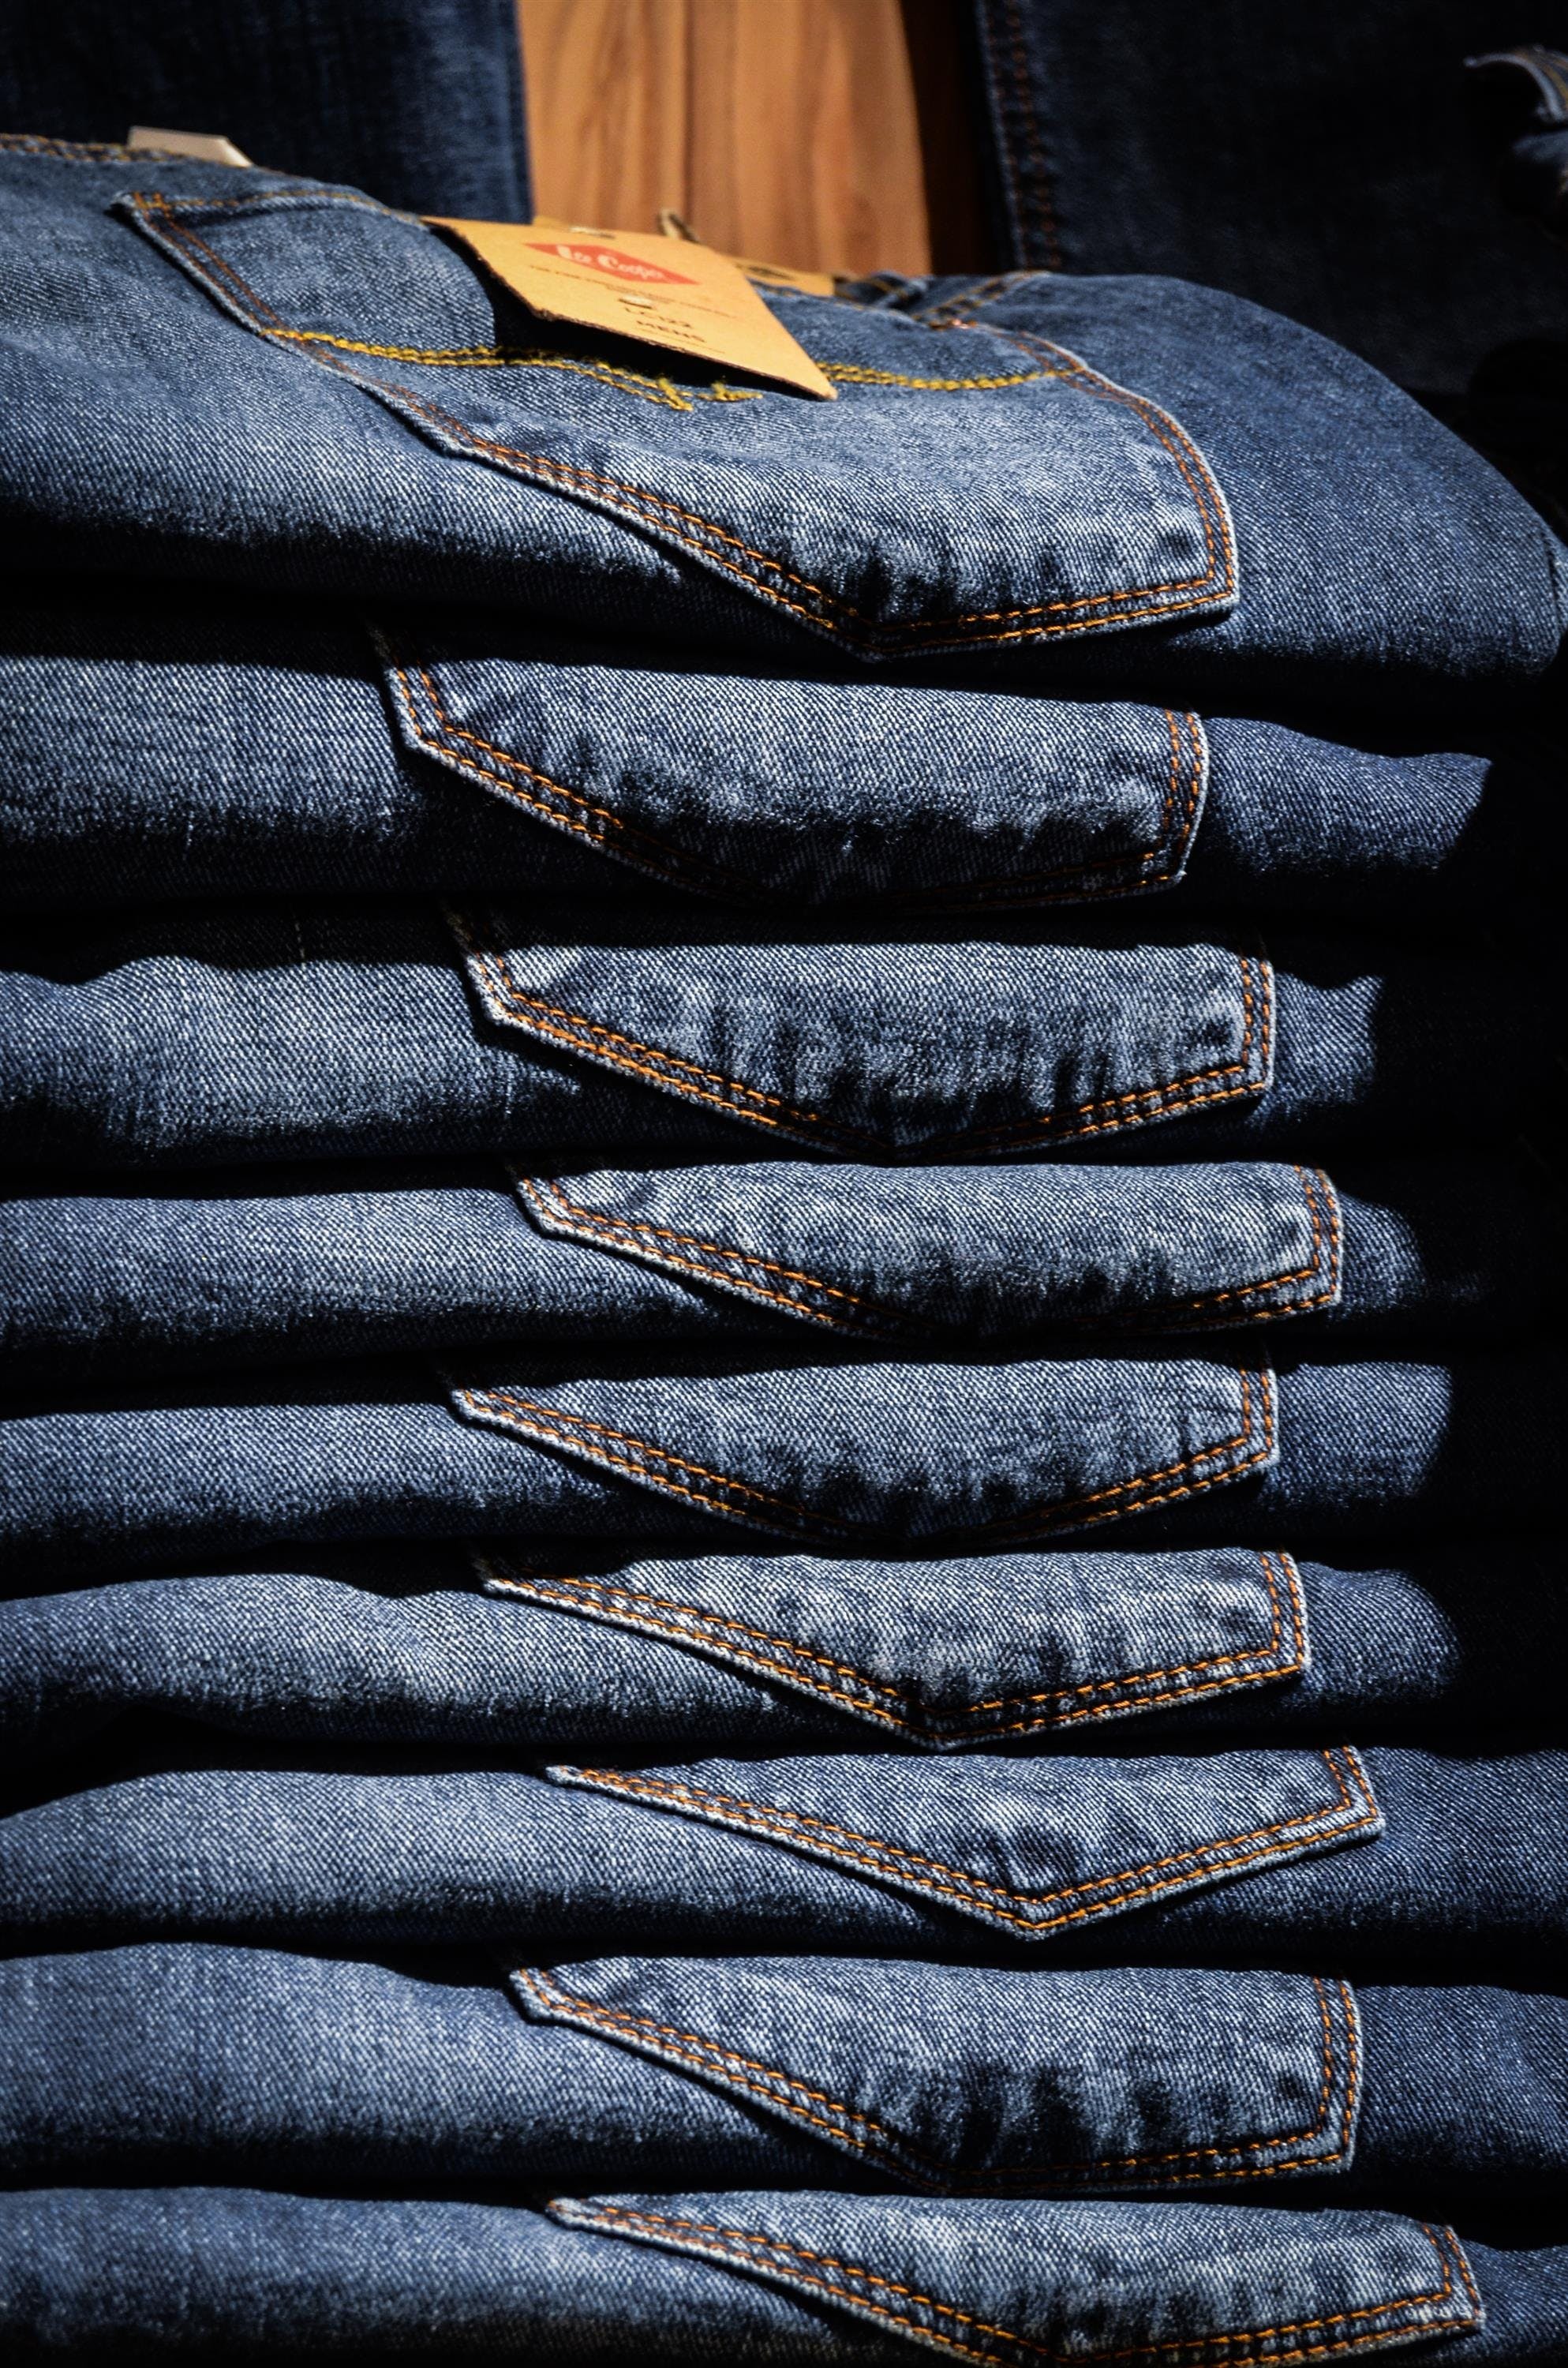 Blue jeans stacked on top of eachother.